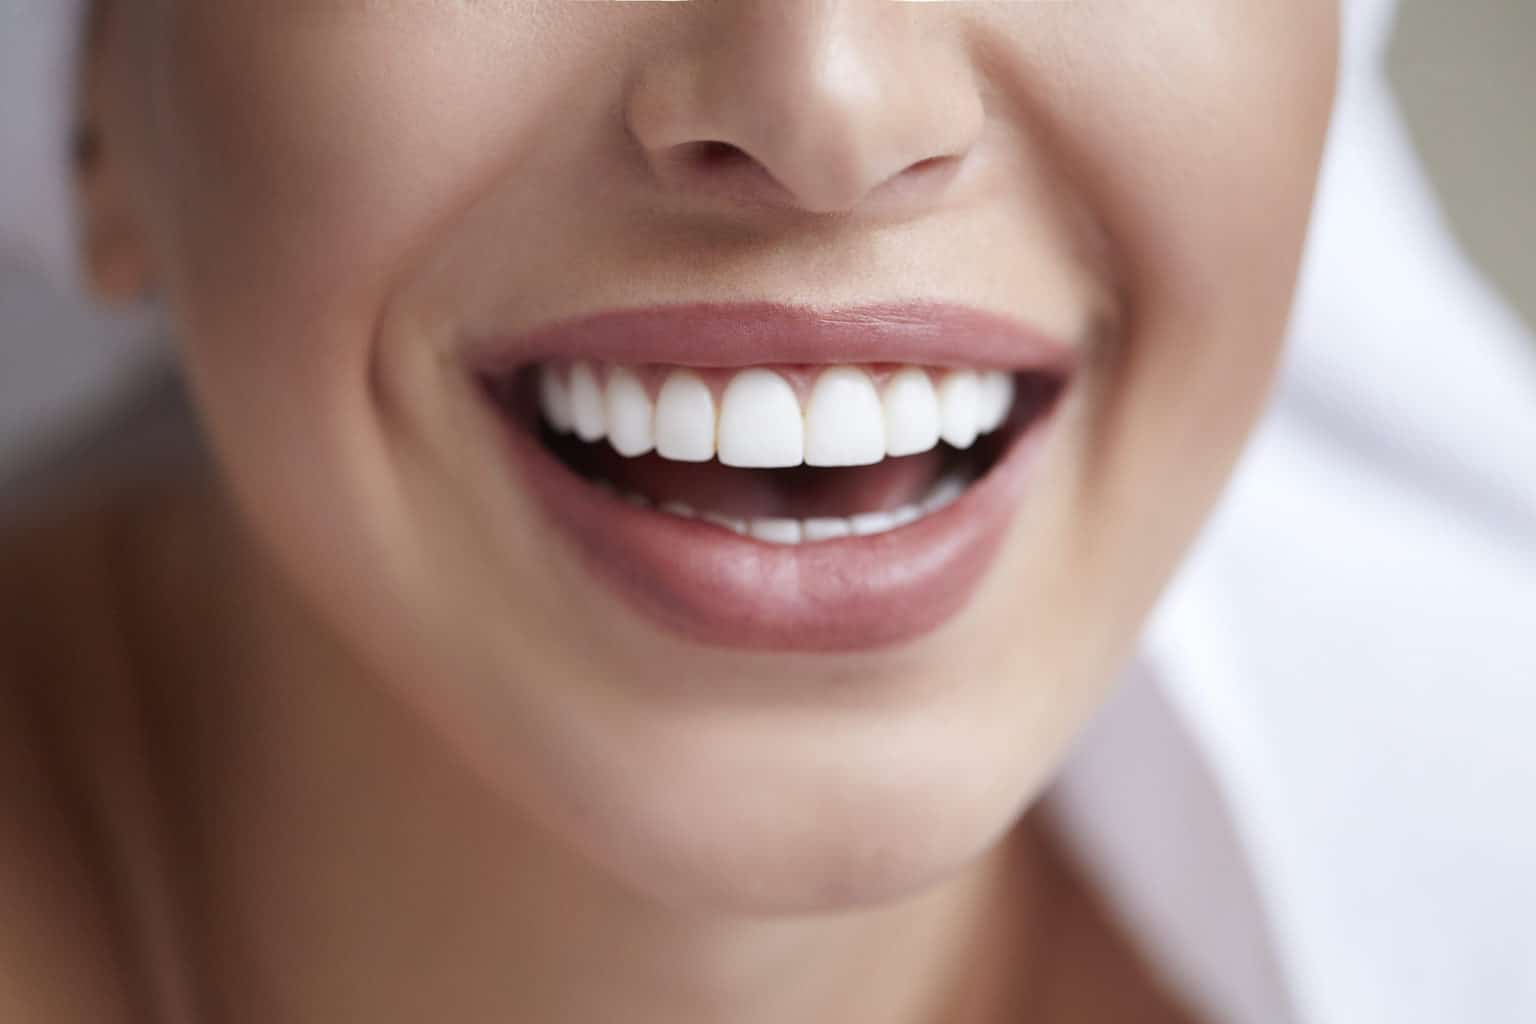 Featured image for “Smile wider in Shenzhen with Dental Veneers”